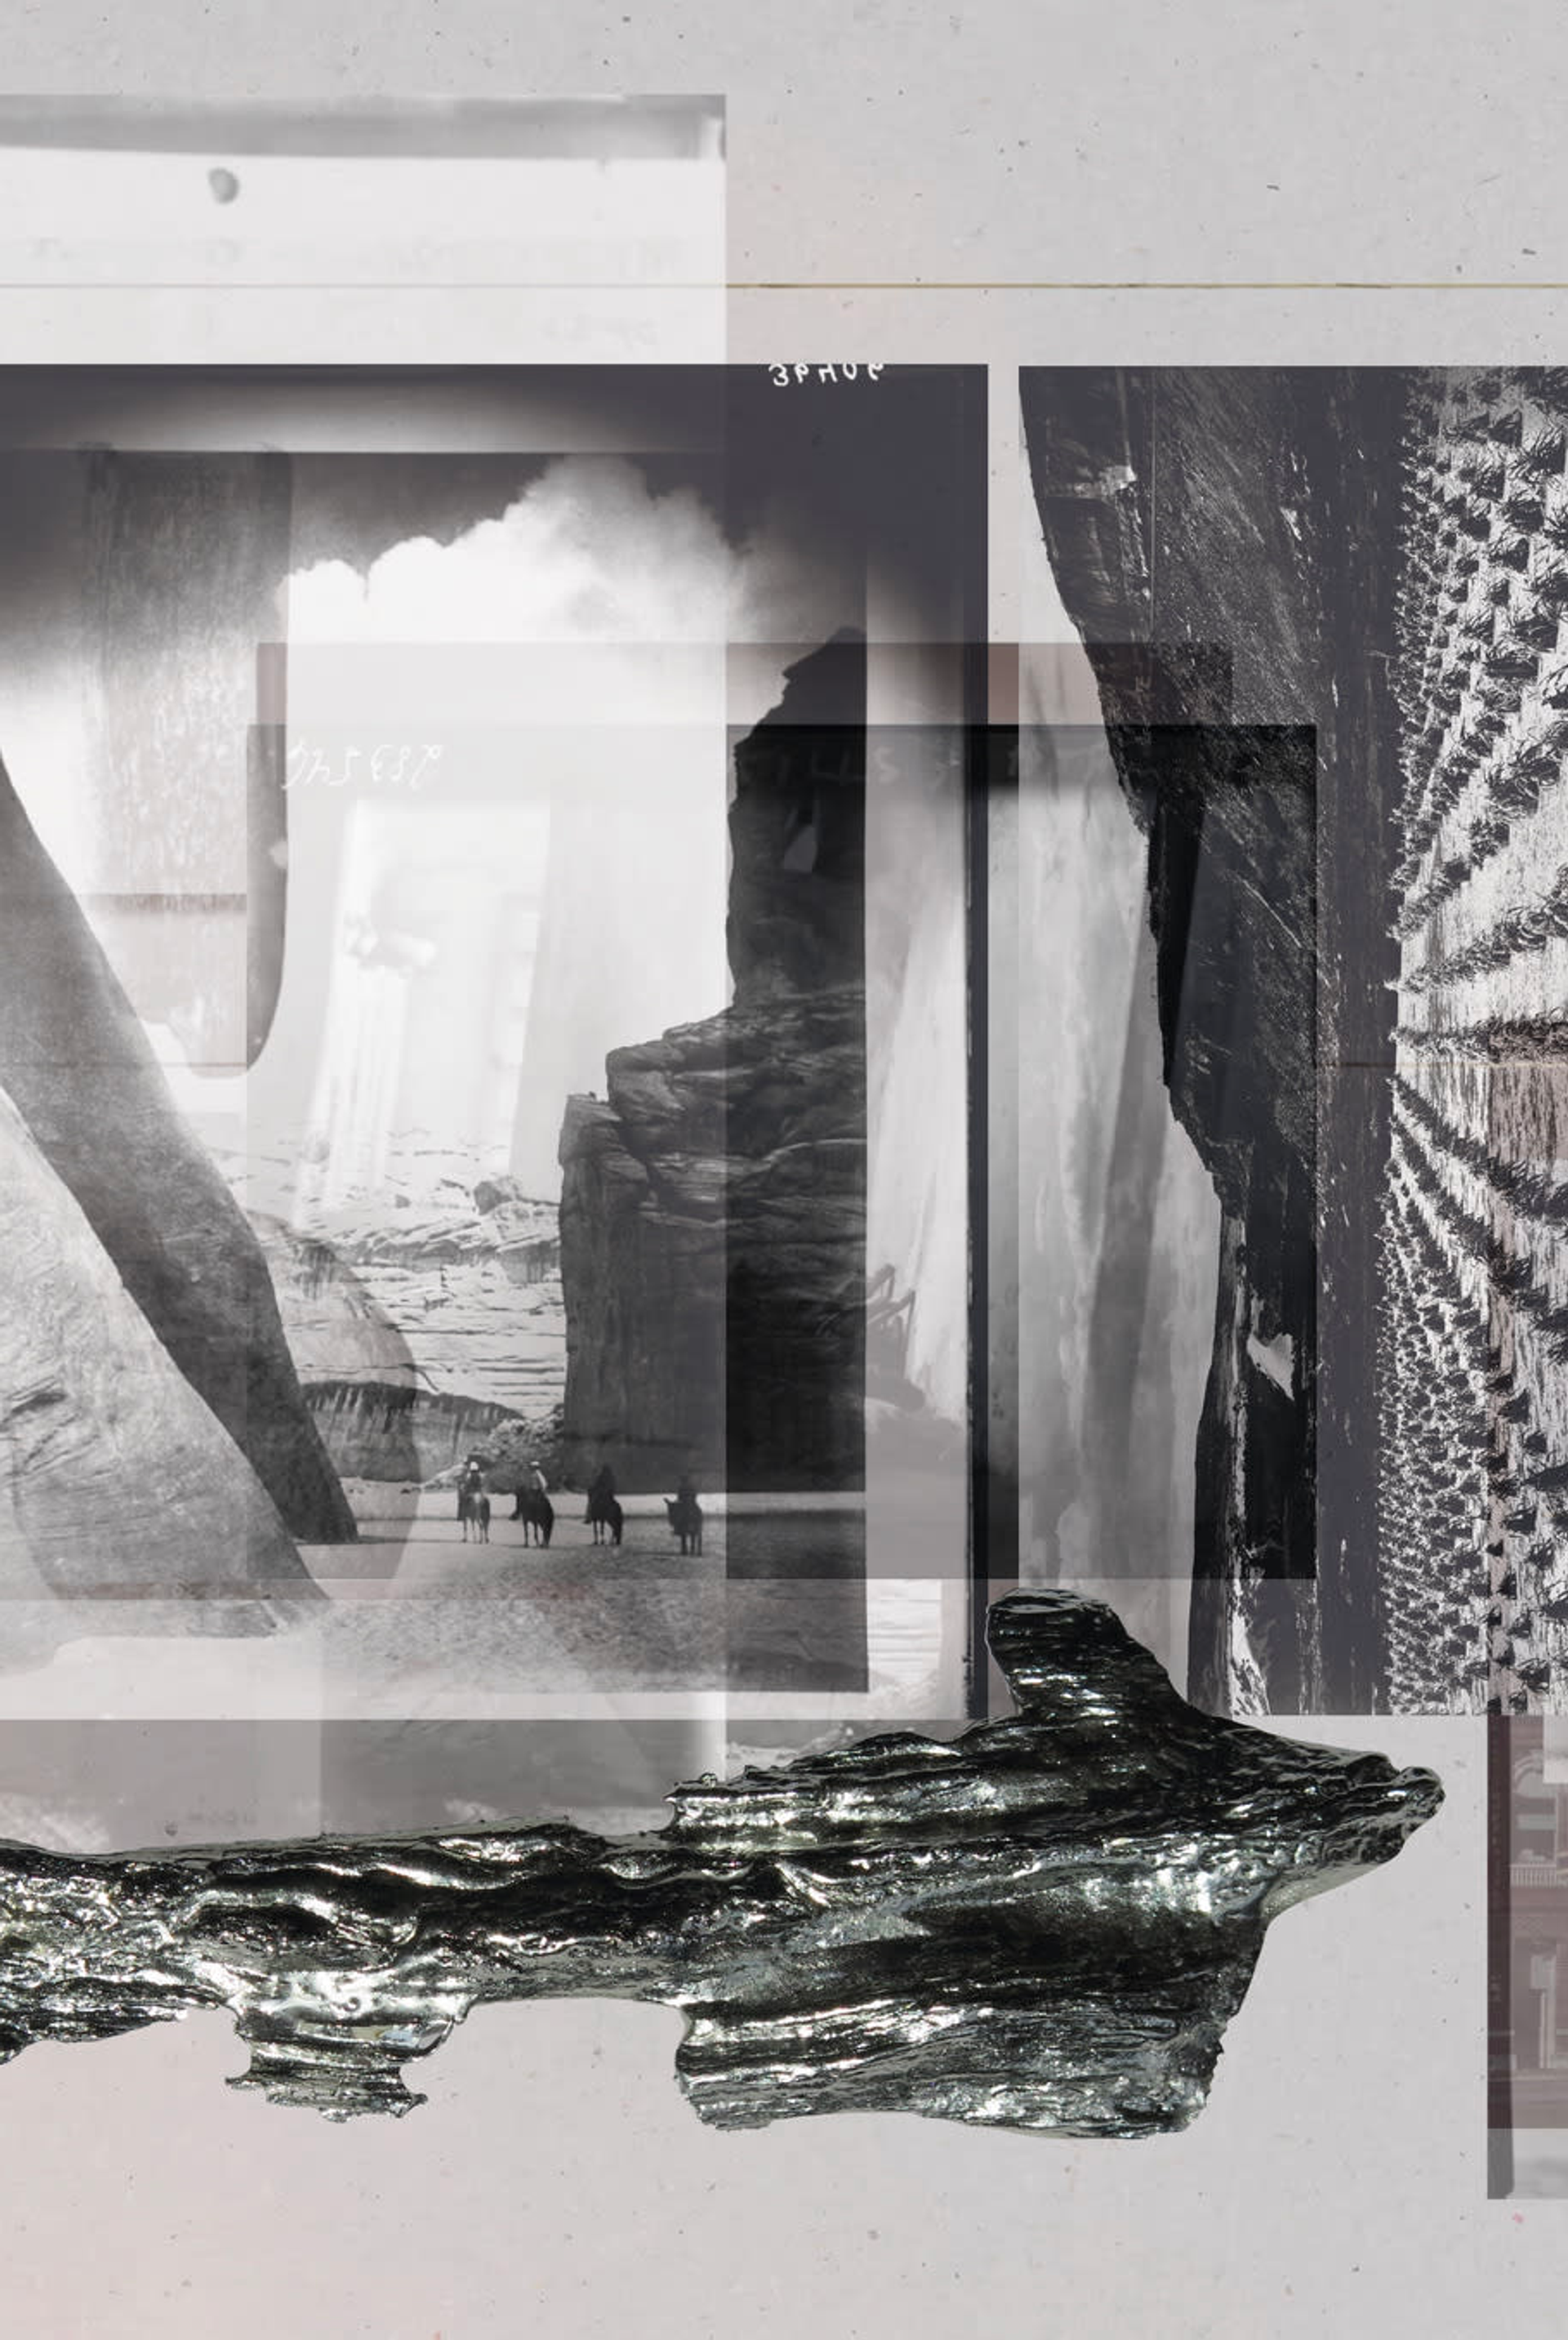 Image of a collage of black and white photographs, some overlapping or transparent, and one featuring four people on horses next to rocks or cliffs, and a long, dark unknown object. By Georgia May Jaeckle